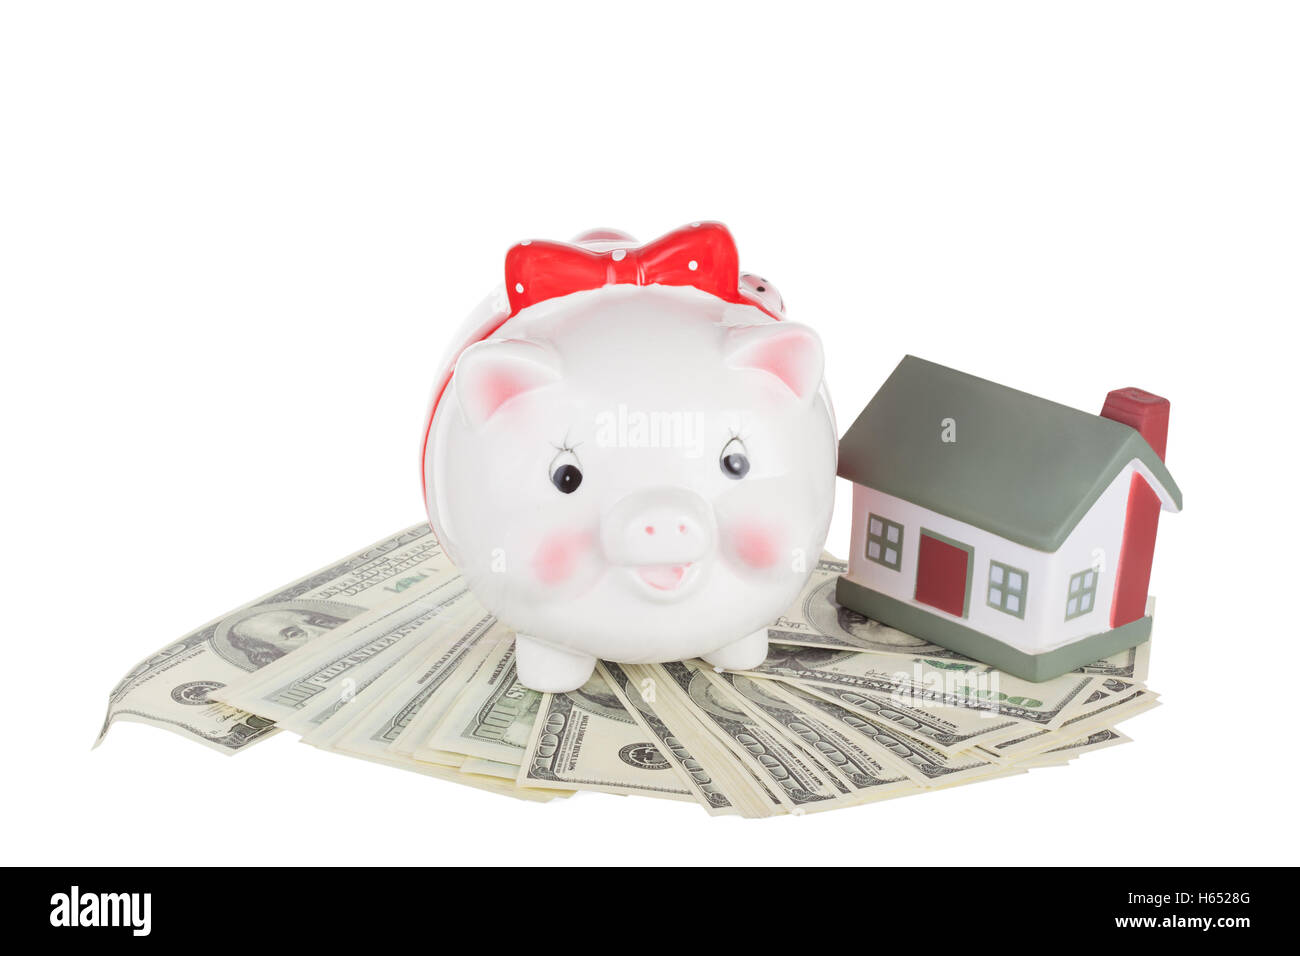 Pig moneybox on money and the toy house Stock Photo